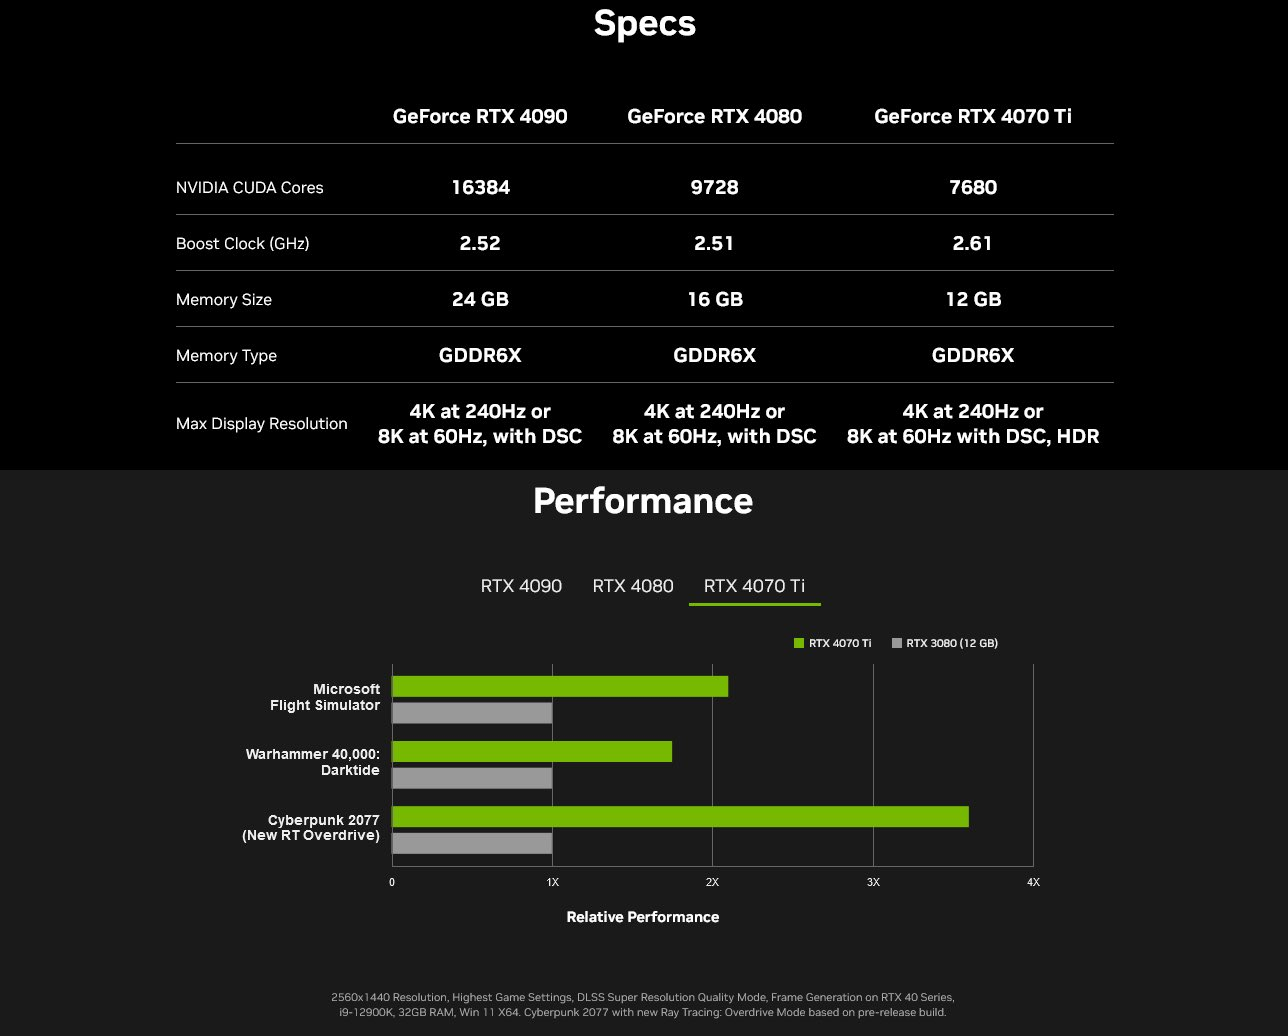 NVIDIA accidentally published GeForce RTX 4070 Ti specifications before the official announcement